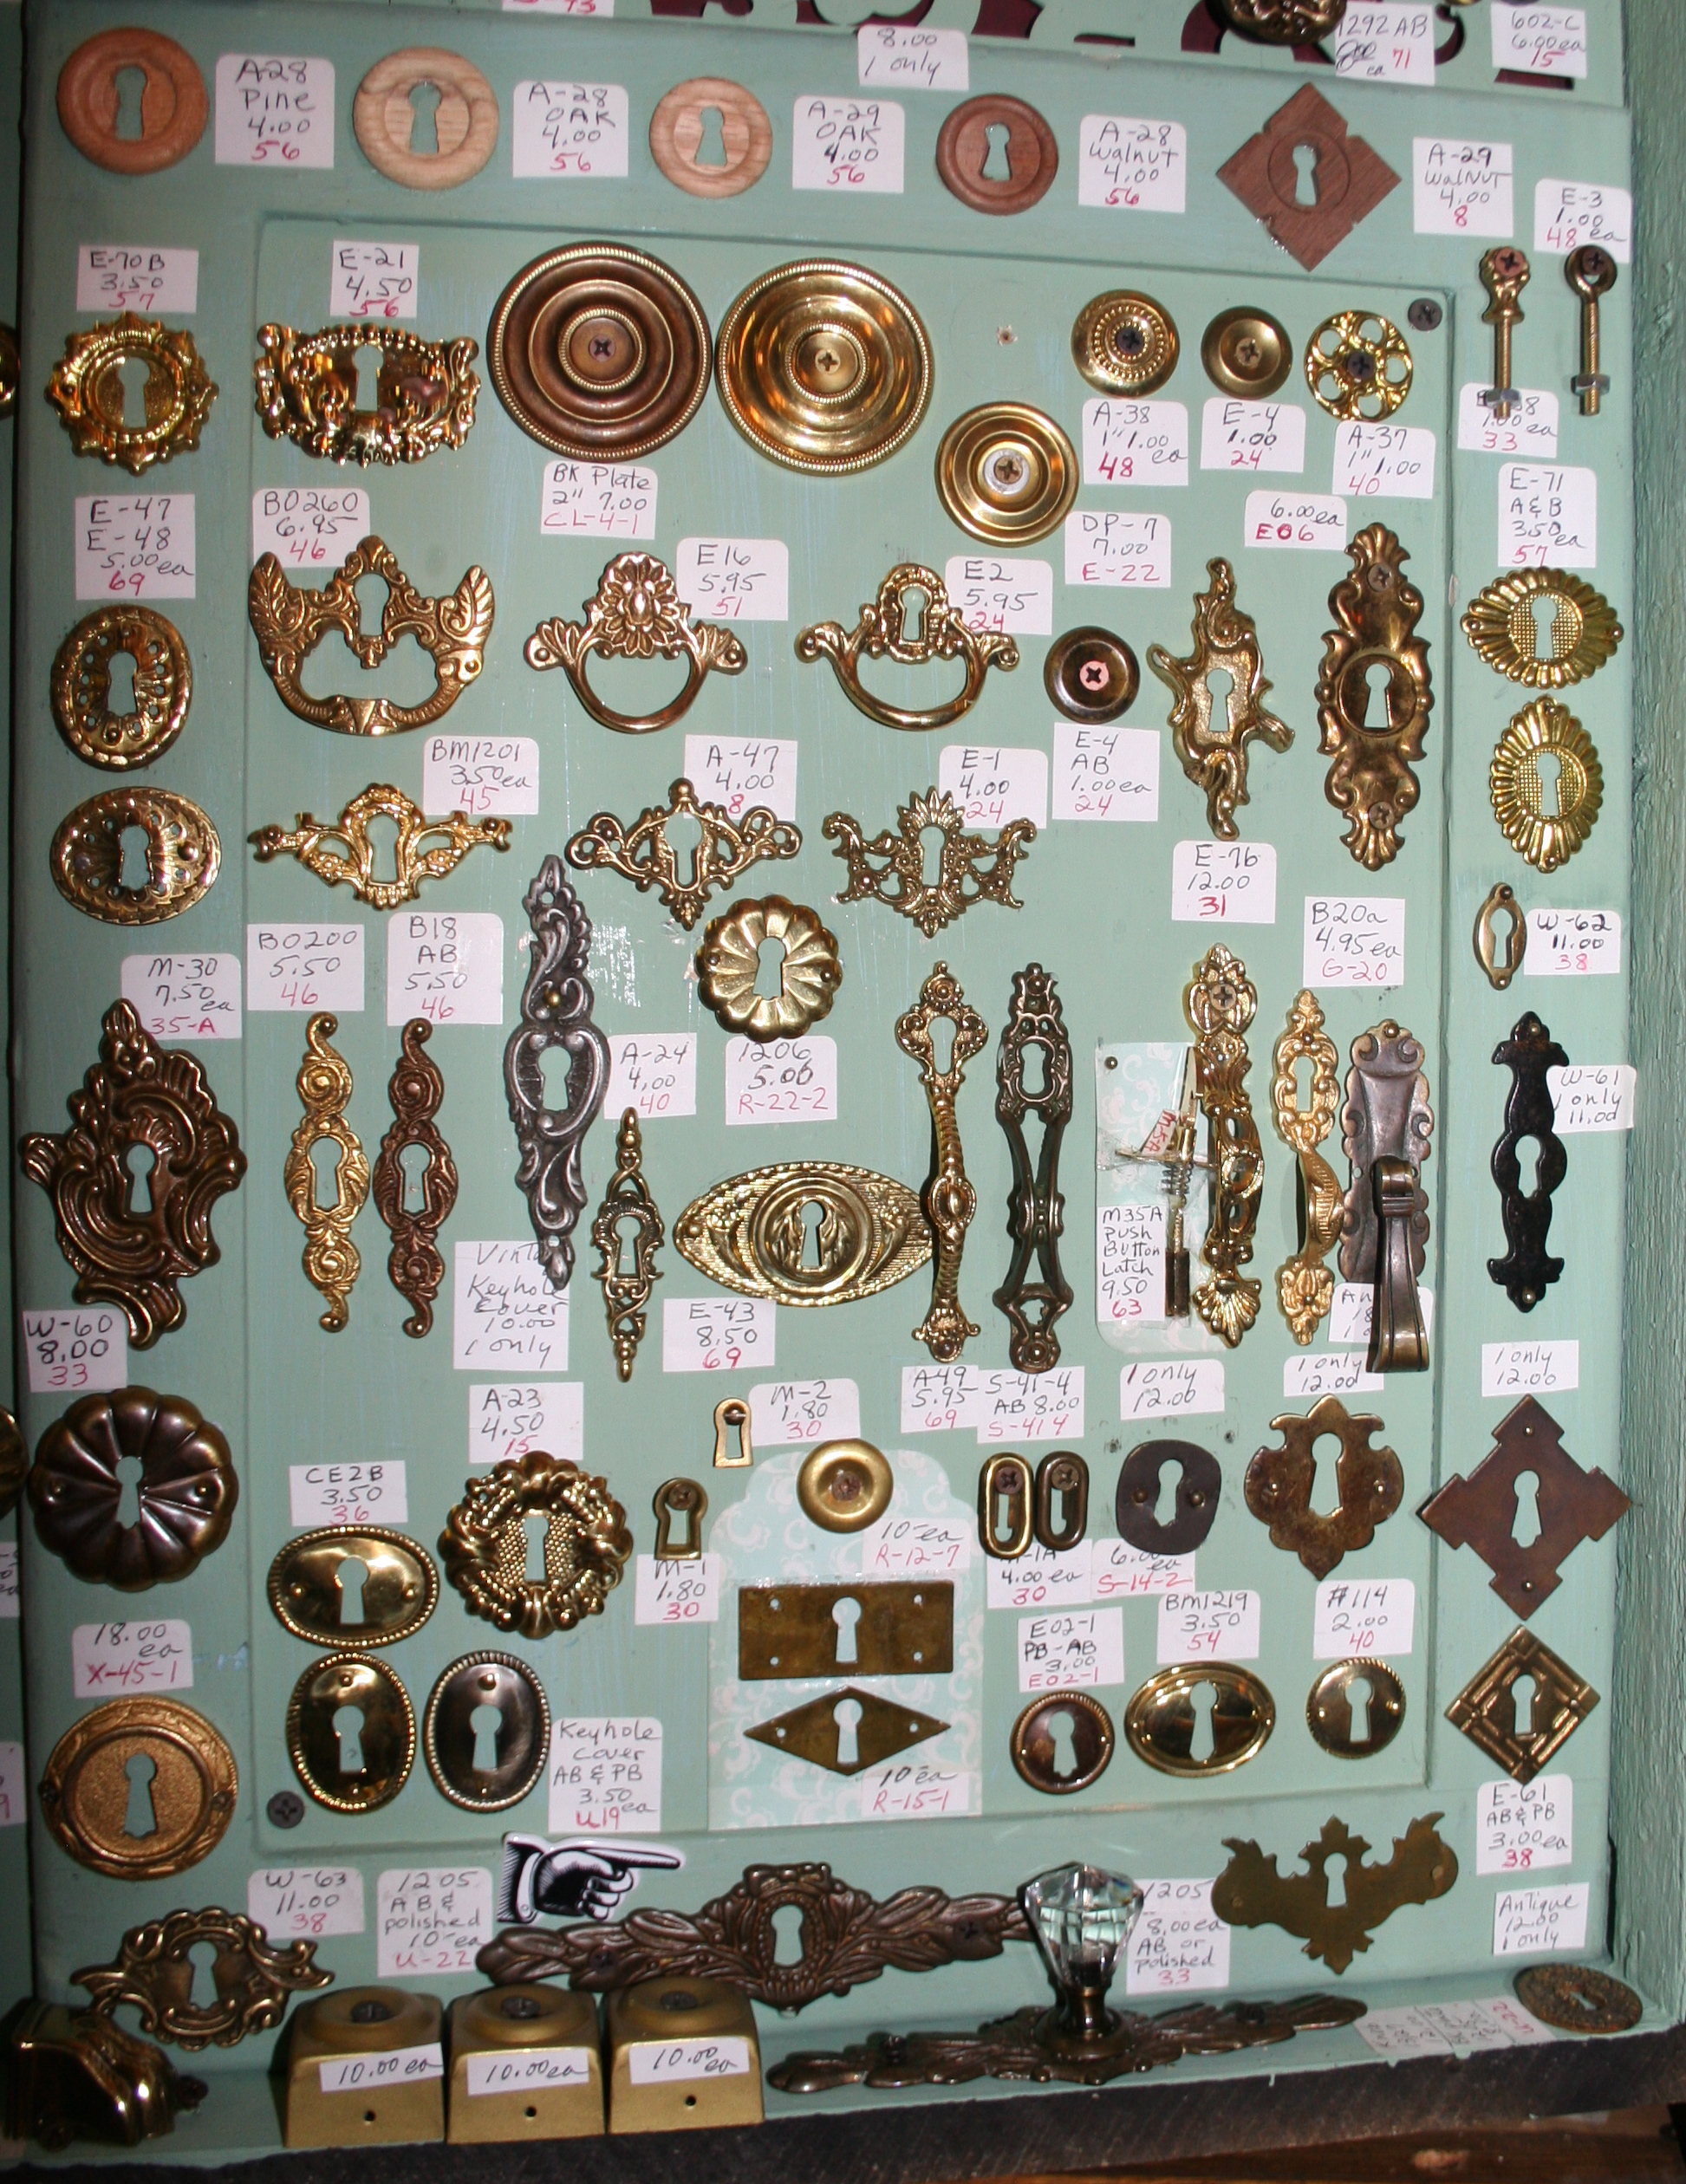 old-fashioned keyhole
              covers, muffshardware.com